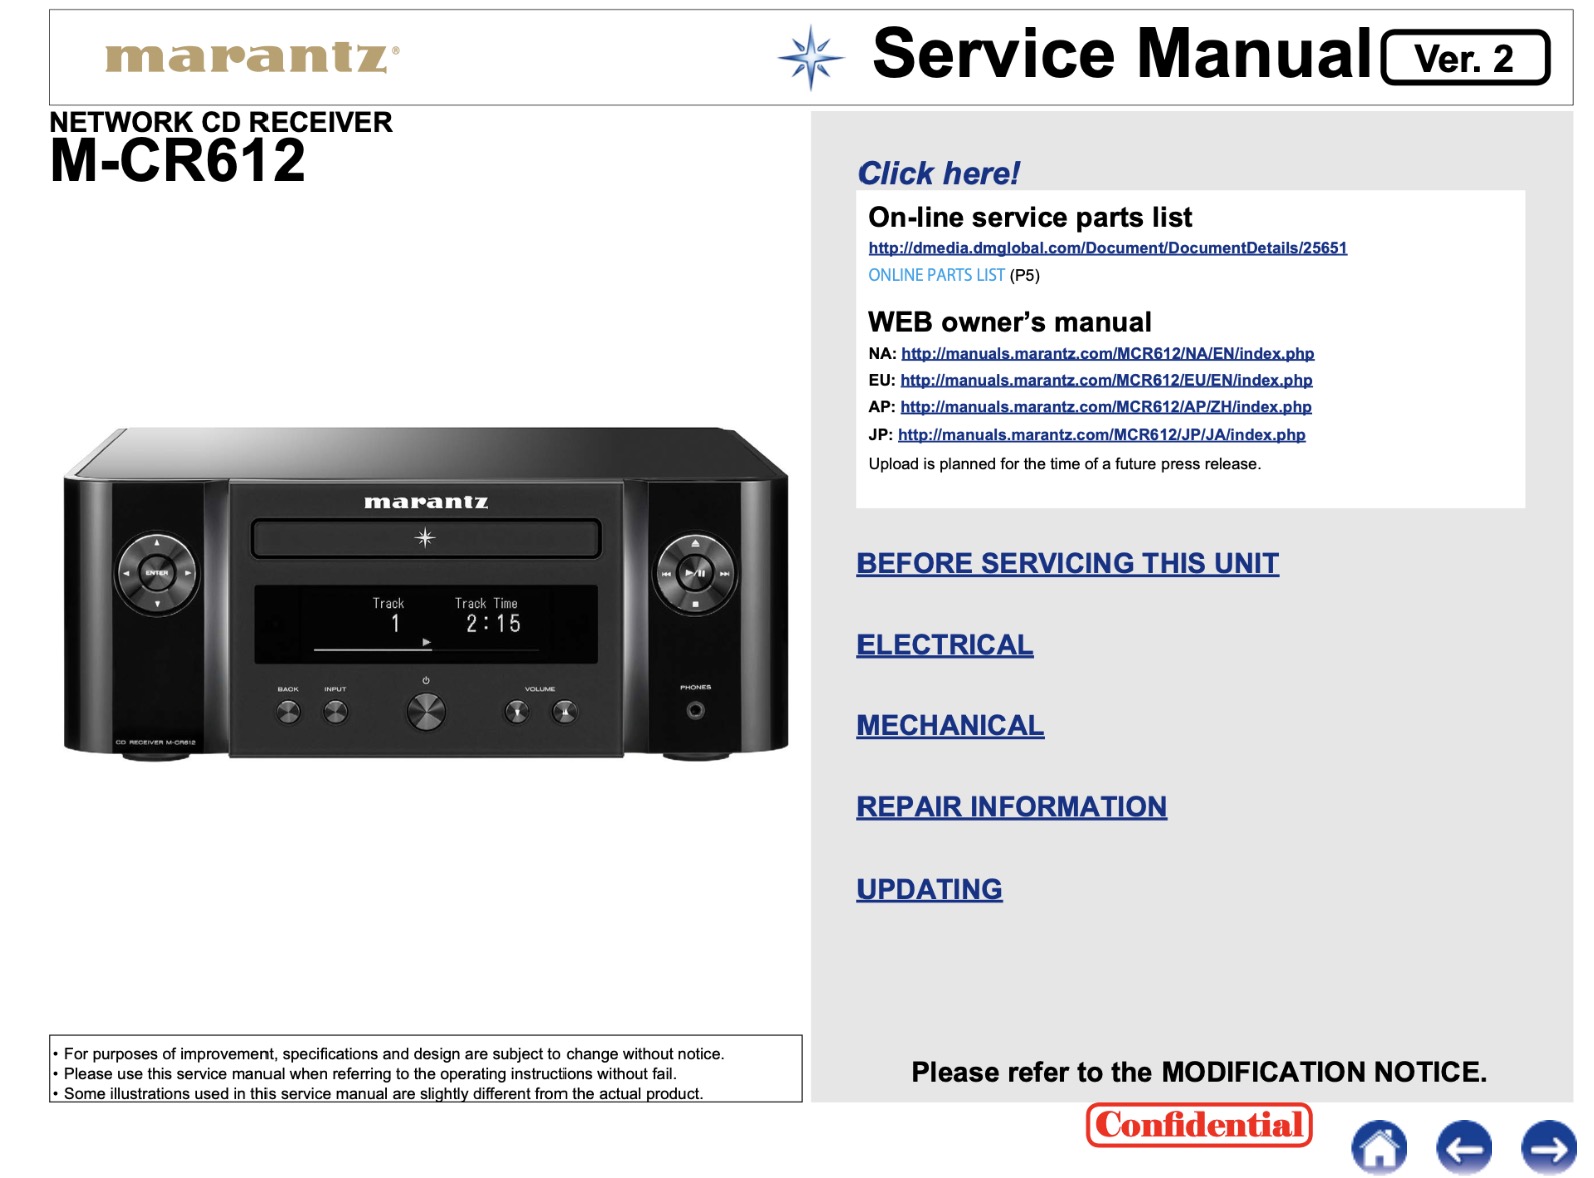 Marantz M-CR612 Network CD Receiver Service Manual, Parts List, Exploded View, Wiring and Schematic Diagram